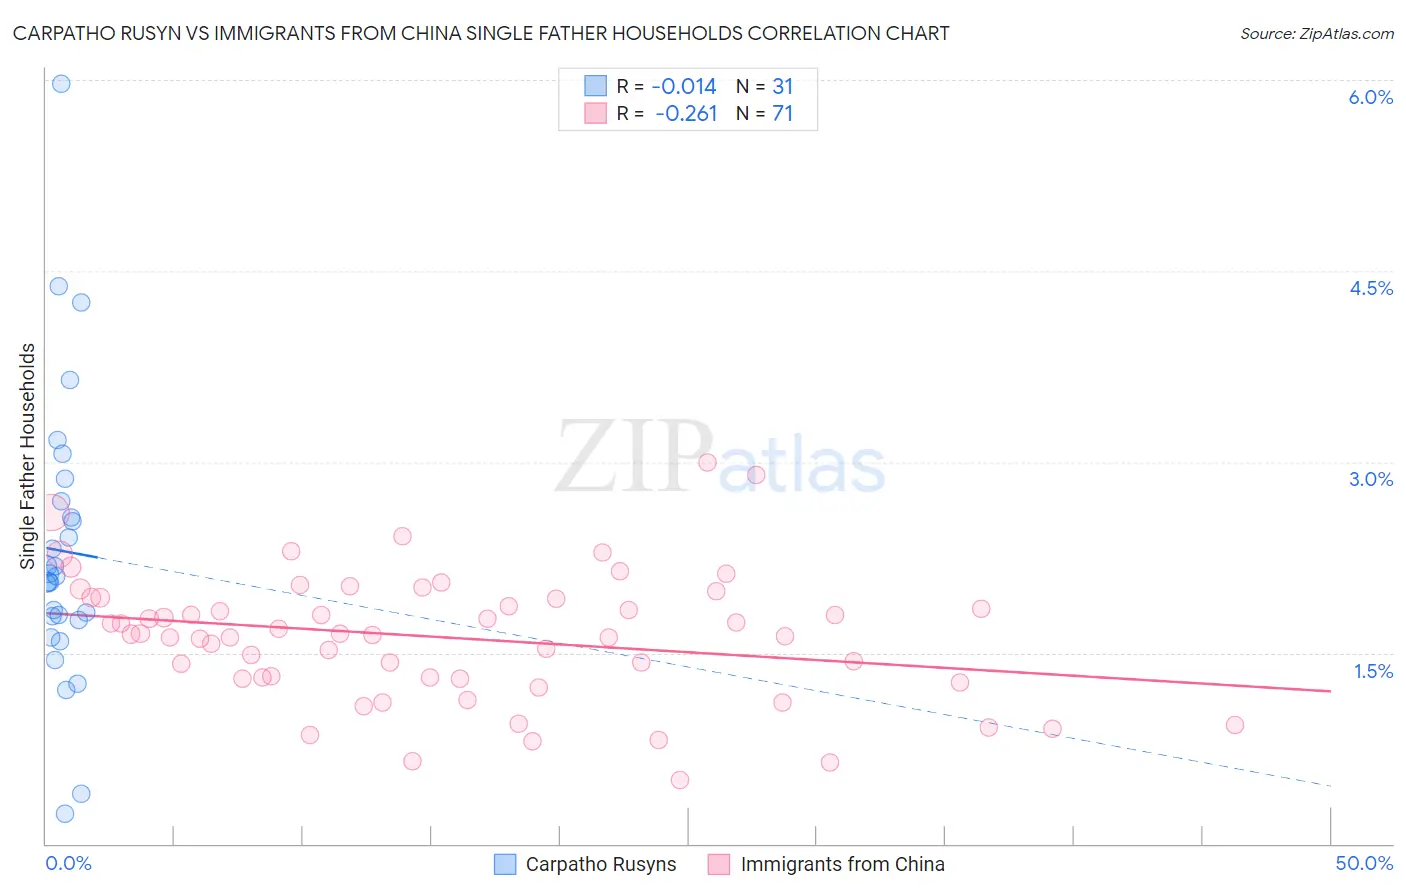 Carpatho Rusyn vs Immigrants from China Single Father Households